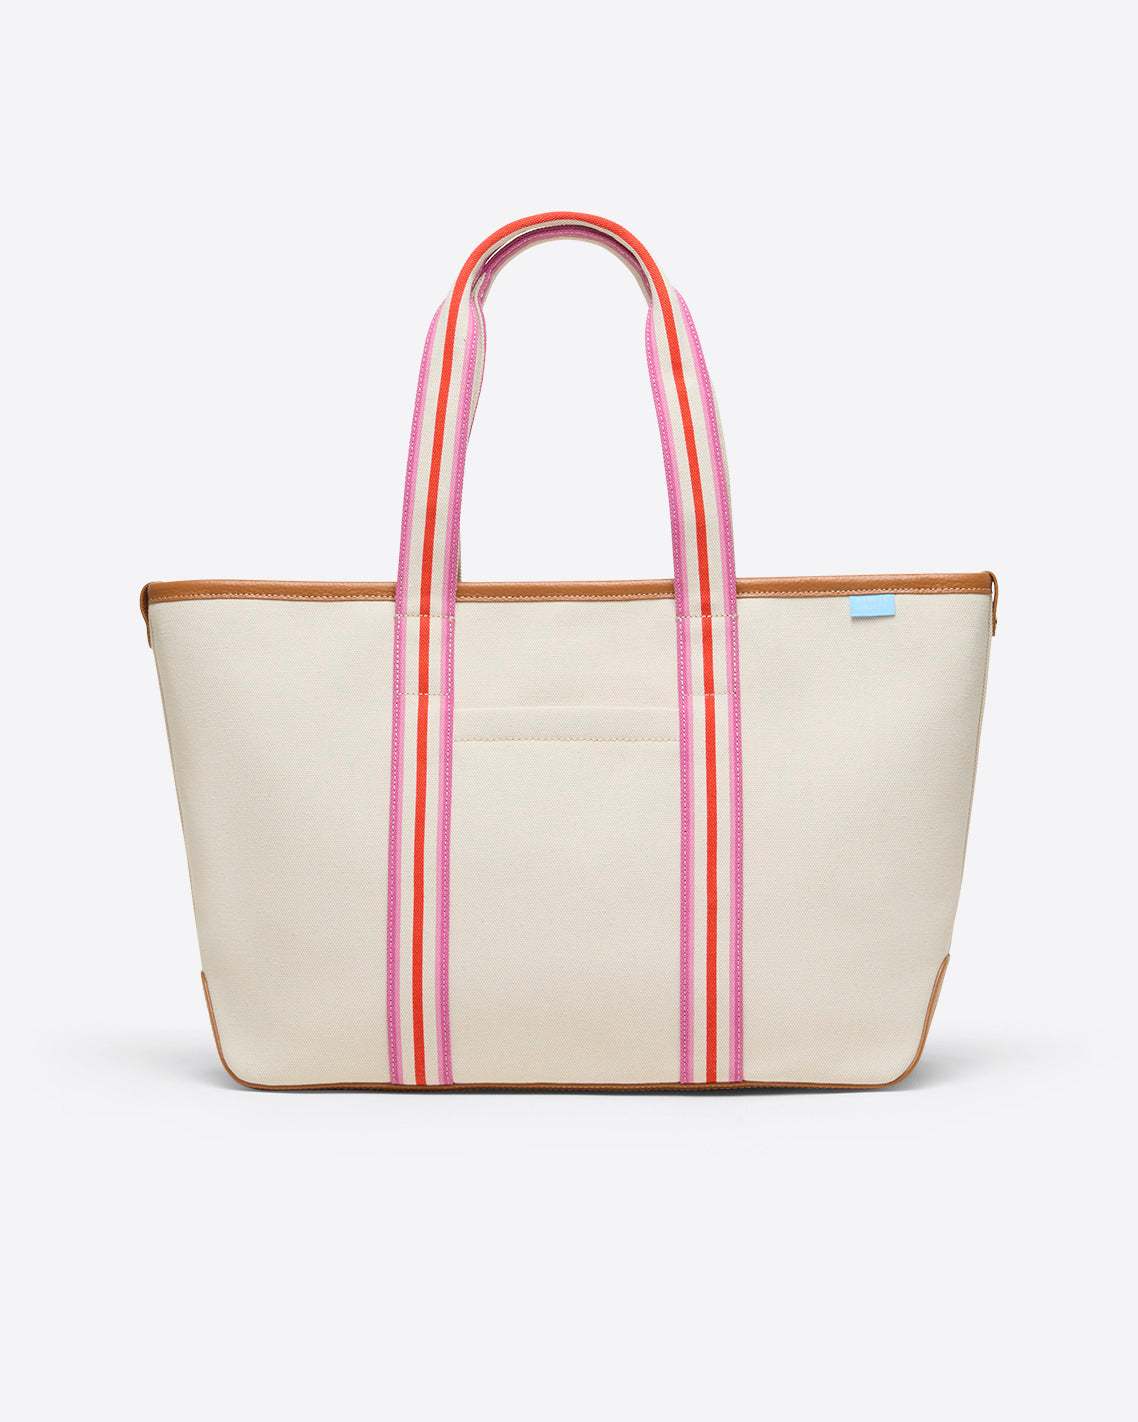 Reese's Limited-Edition Birthday Tote